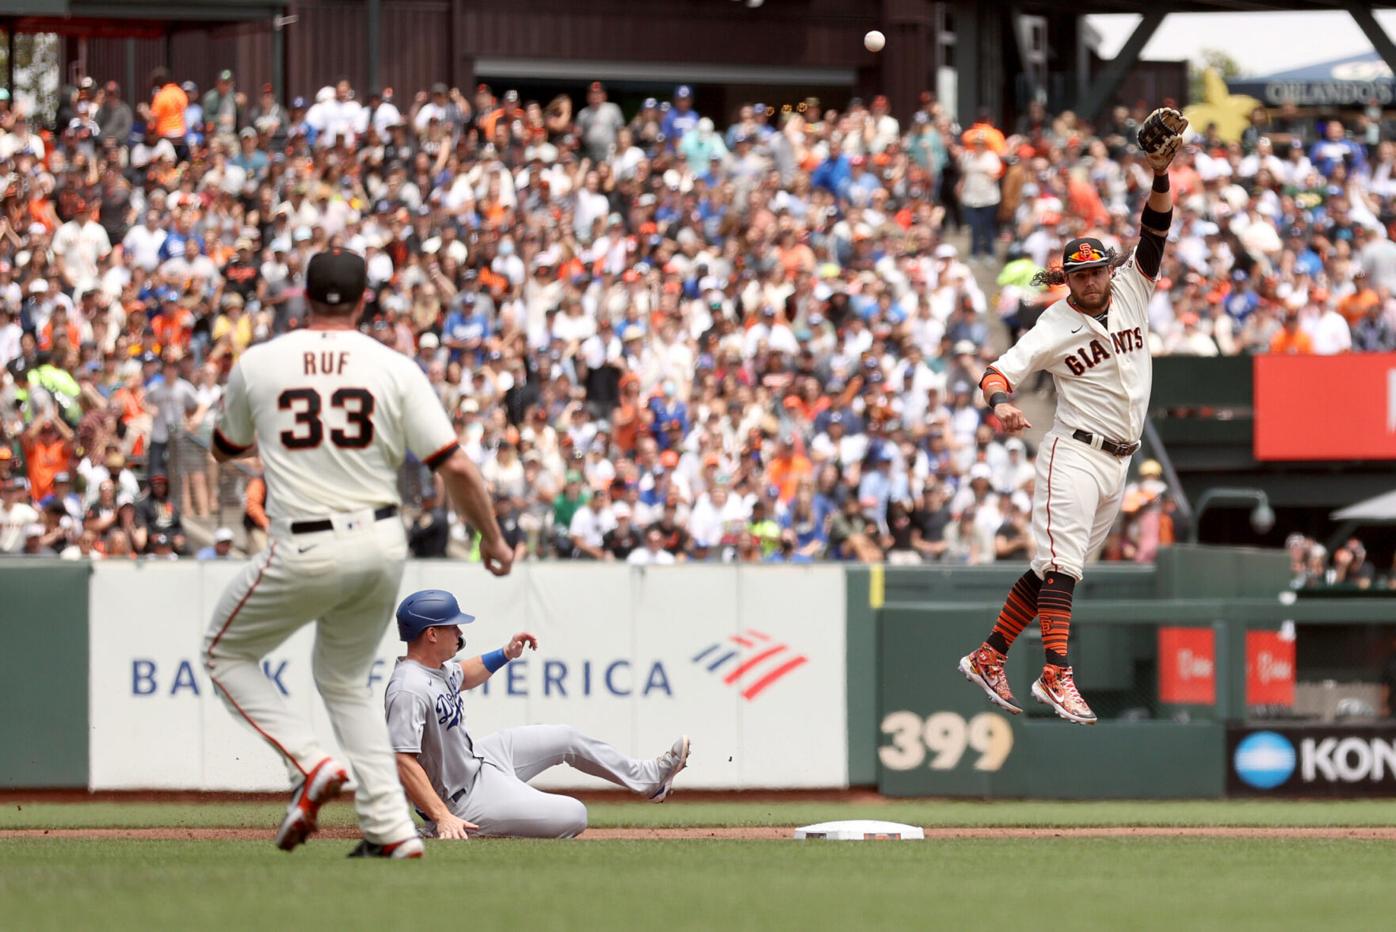 SF Giants swept by Dodgers in 4-game series for first time since 1995